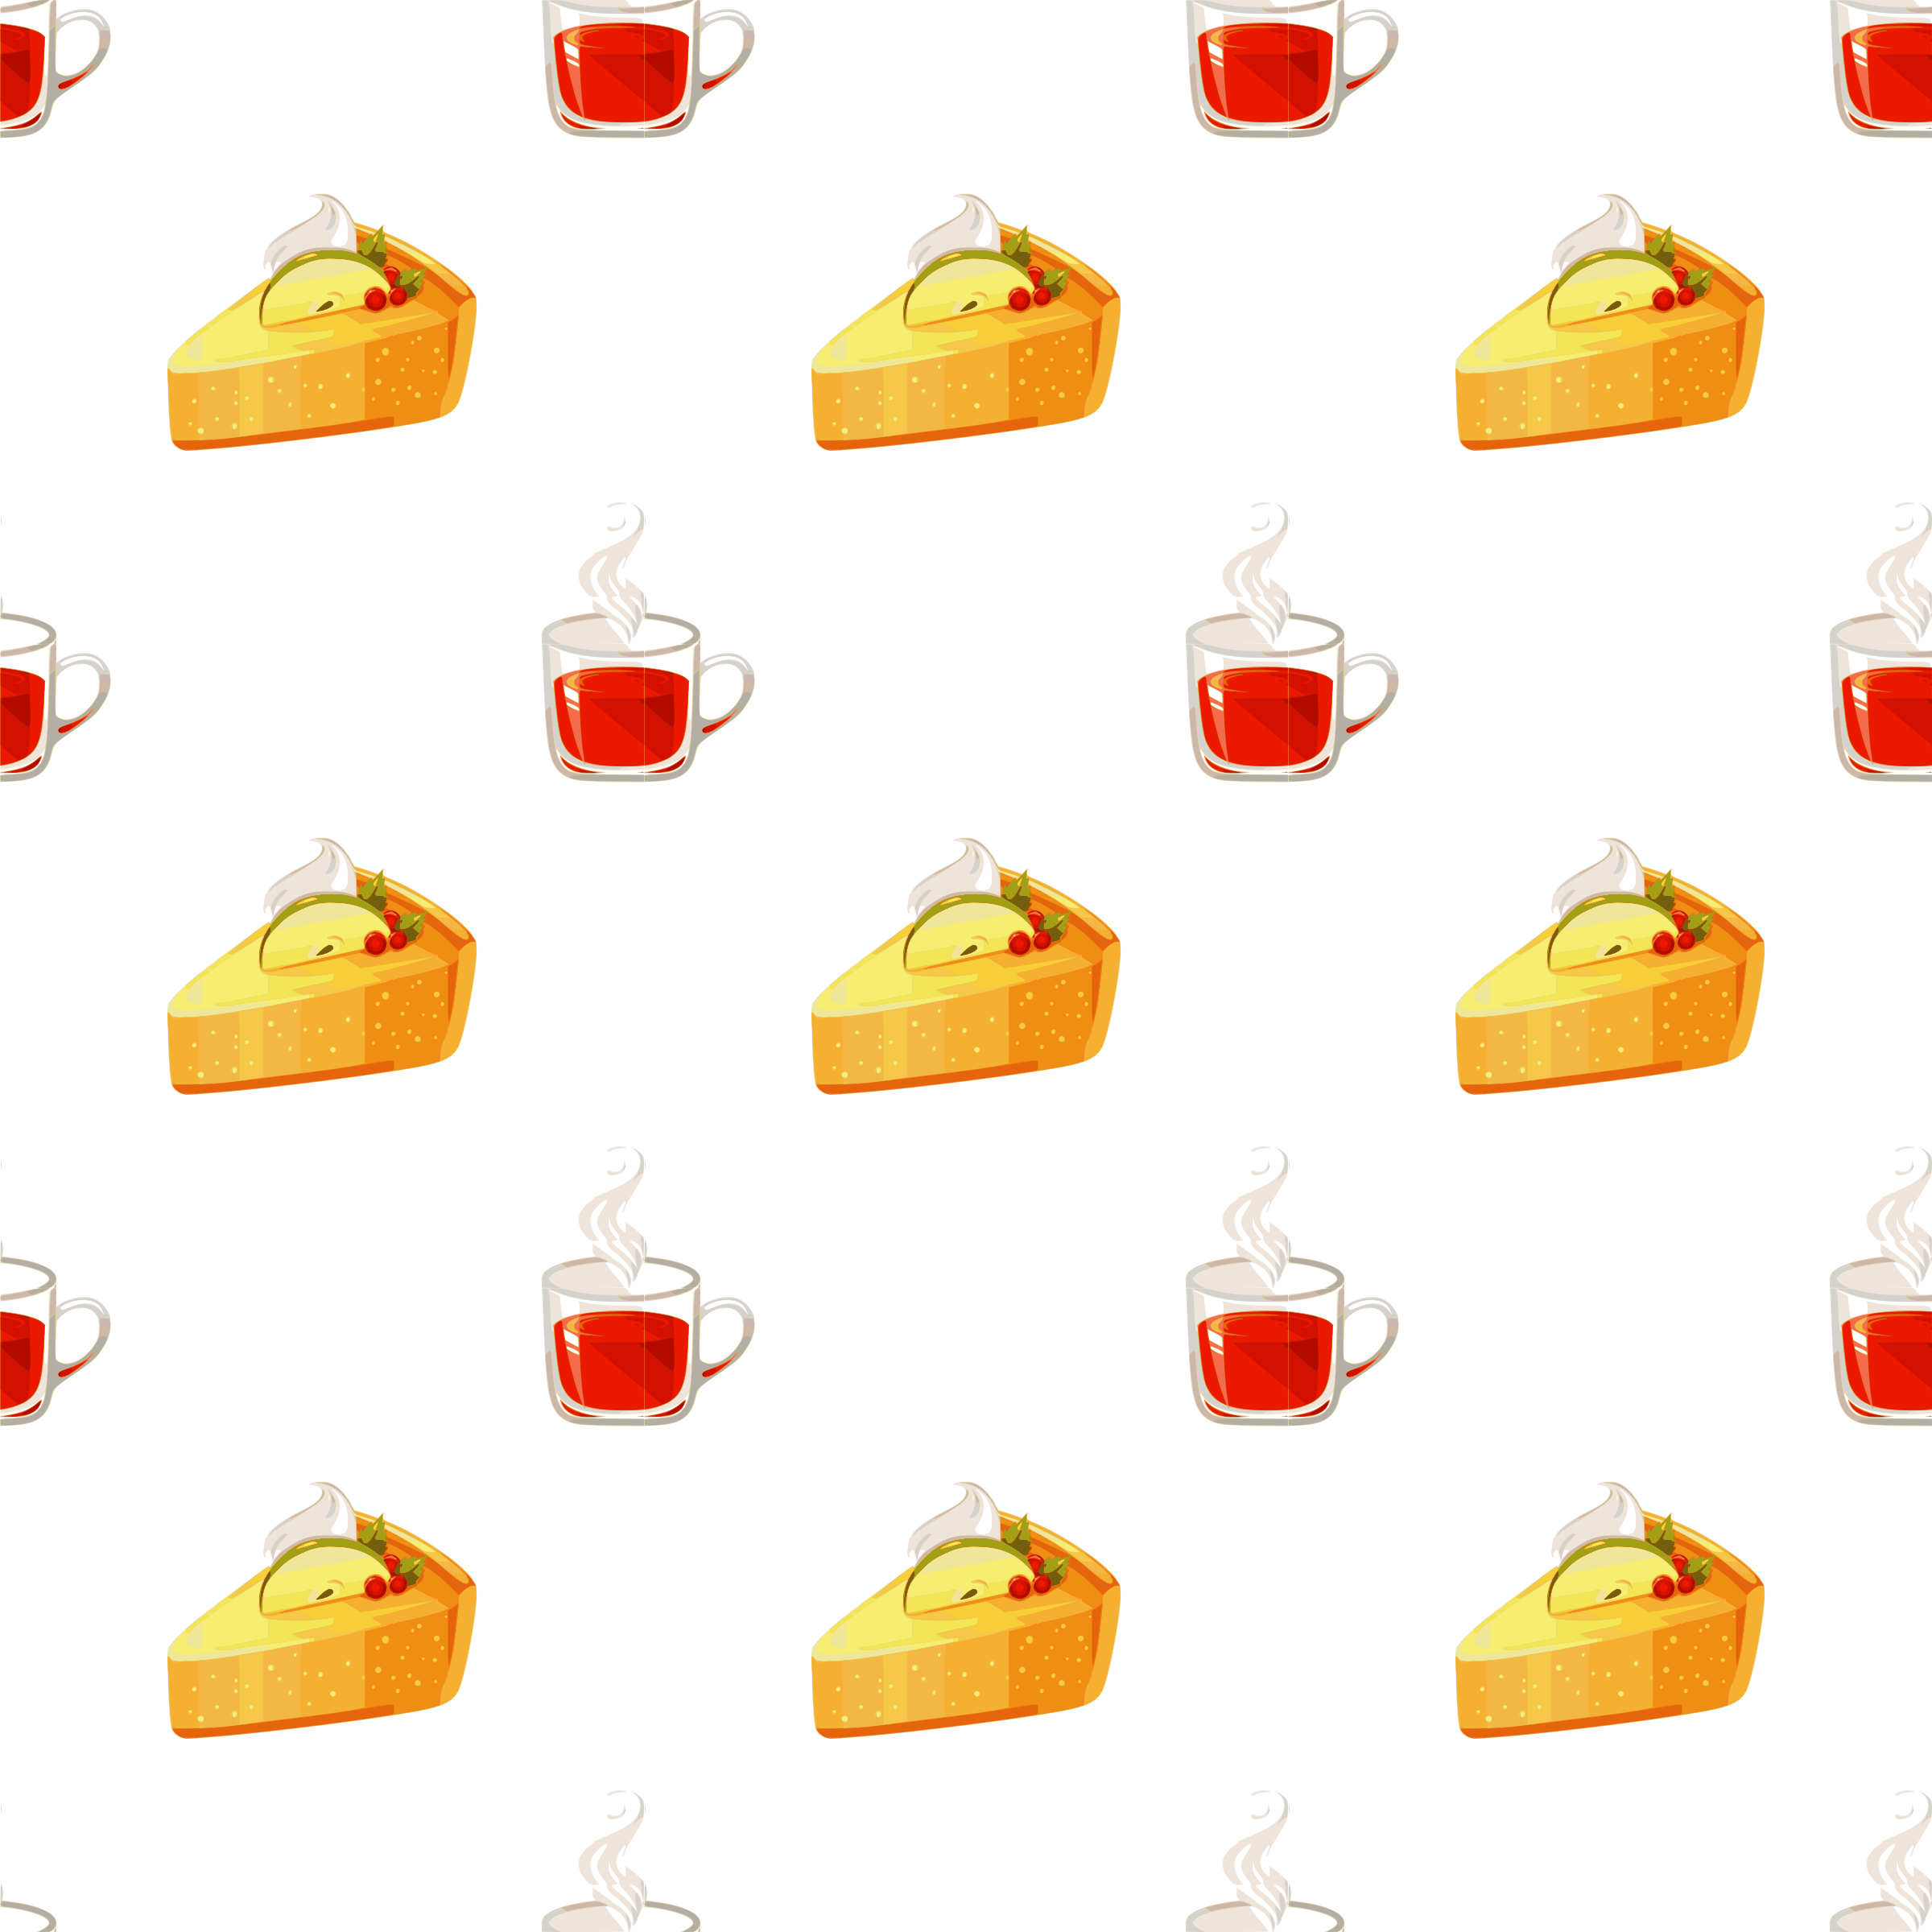 pattern clipart food